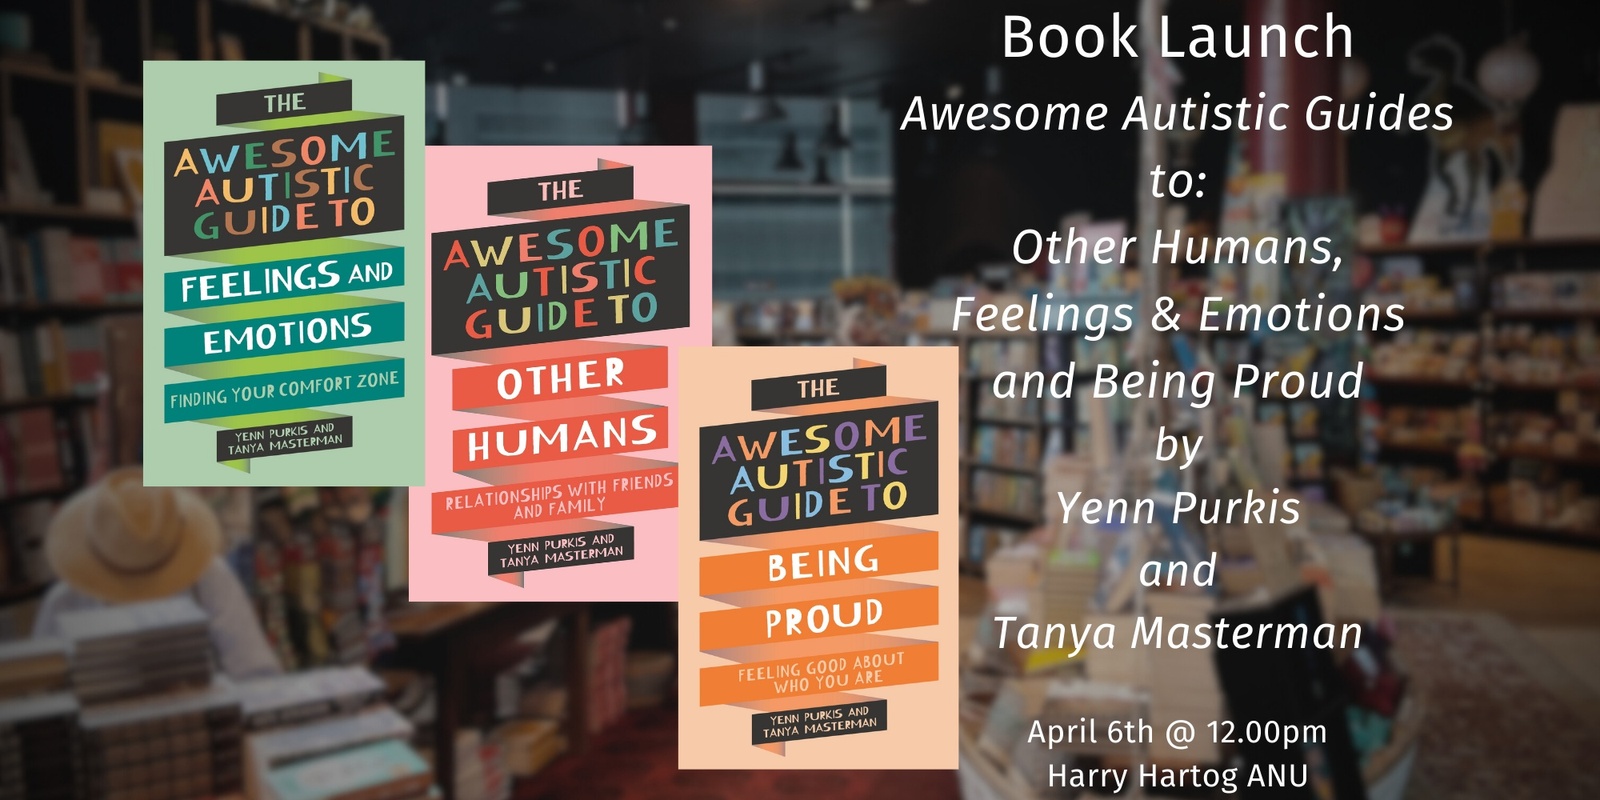 Banner image for Book Launch of the Awesome Autistic Guides with Yenn Purkis, Tanya Masterman, and Min the Meerkat